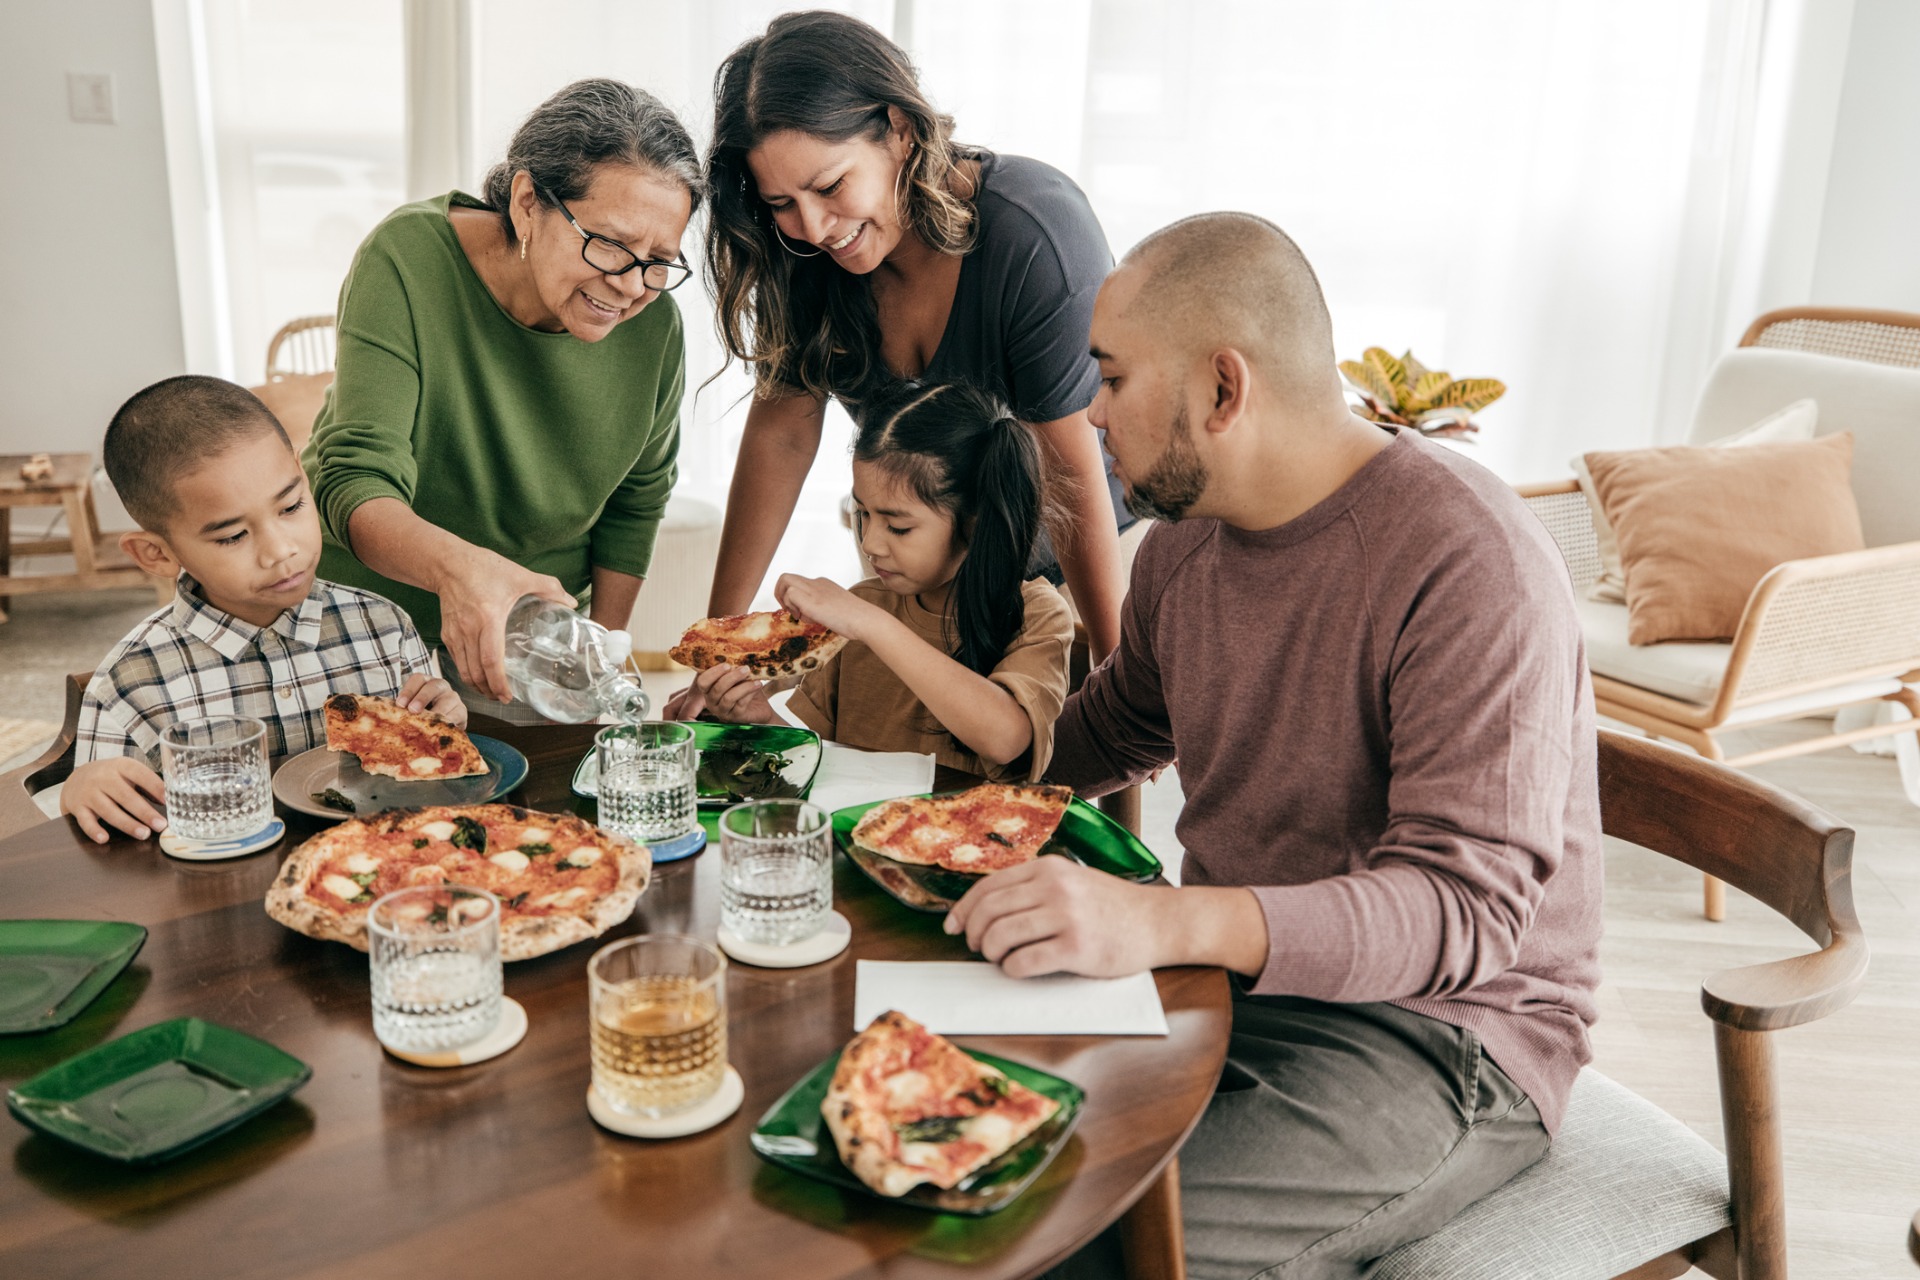 This is a photo of a family eating pizza for dinner.